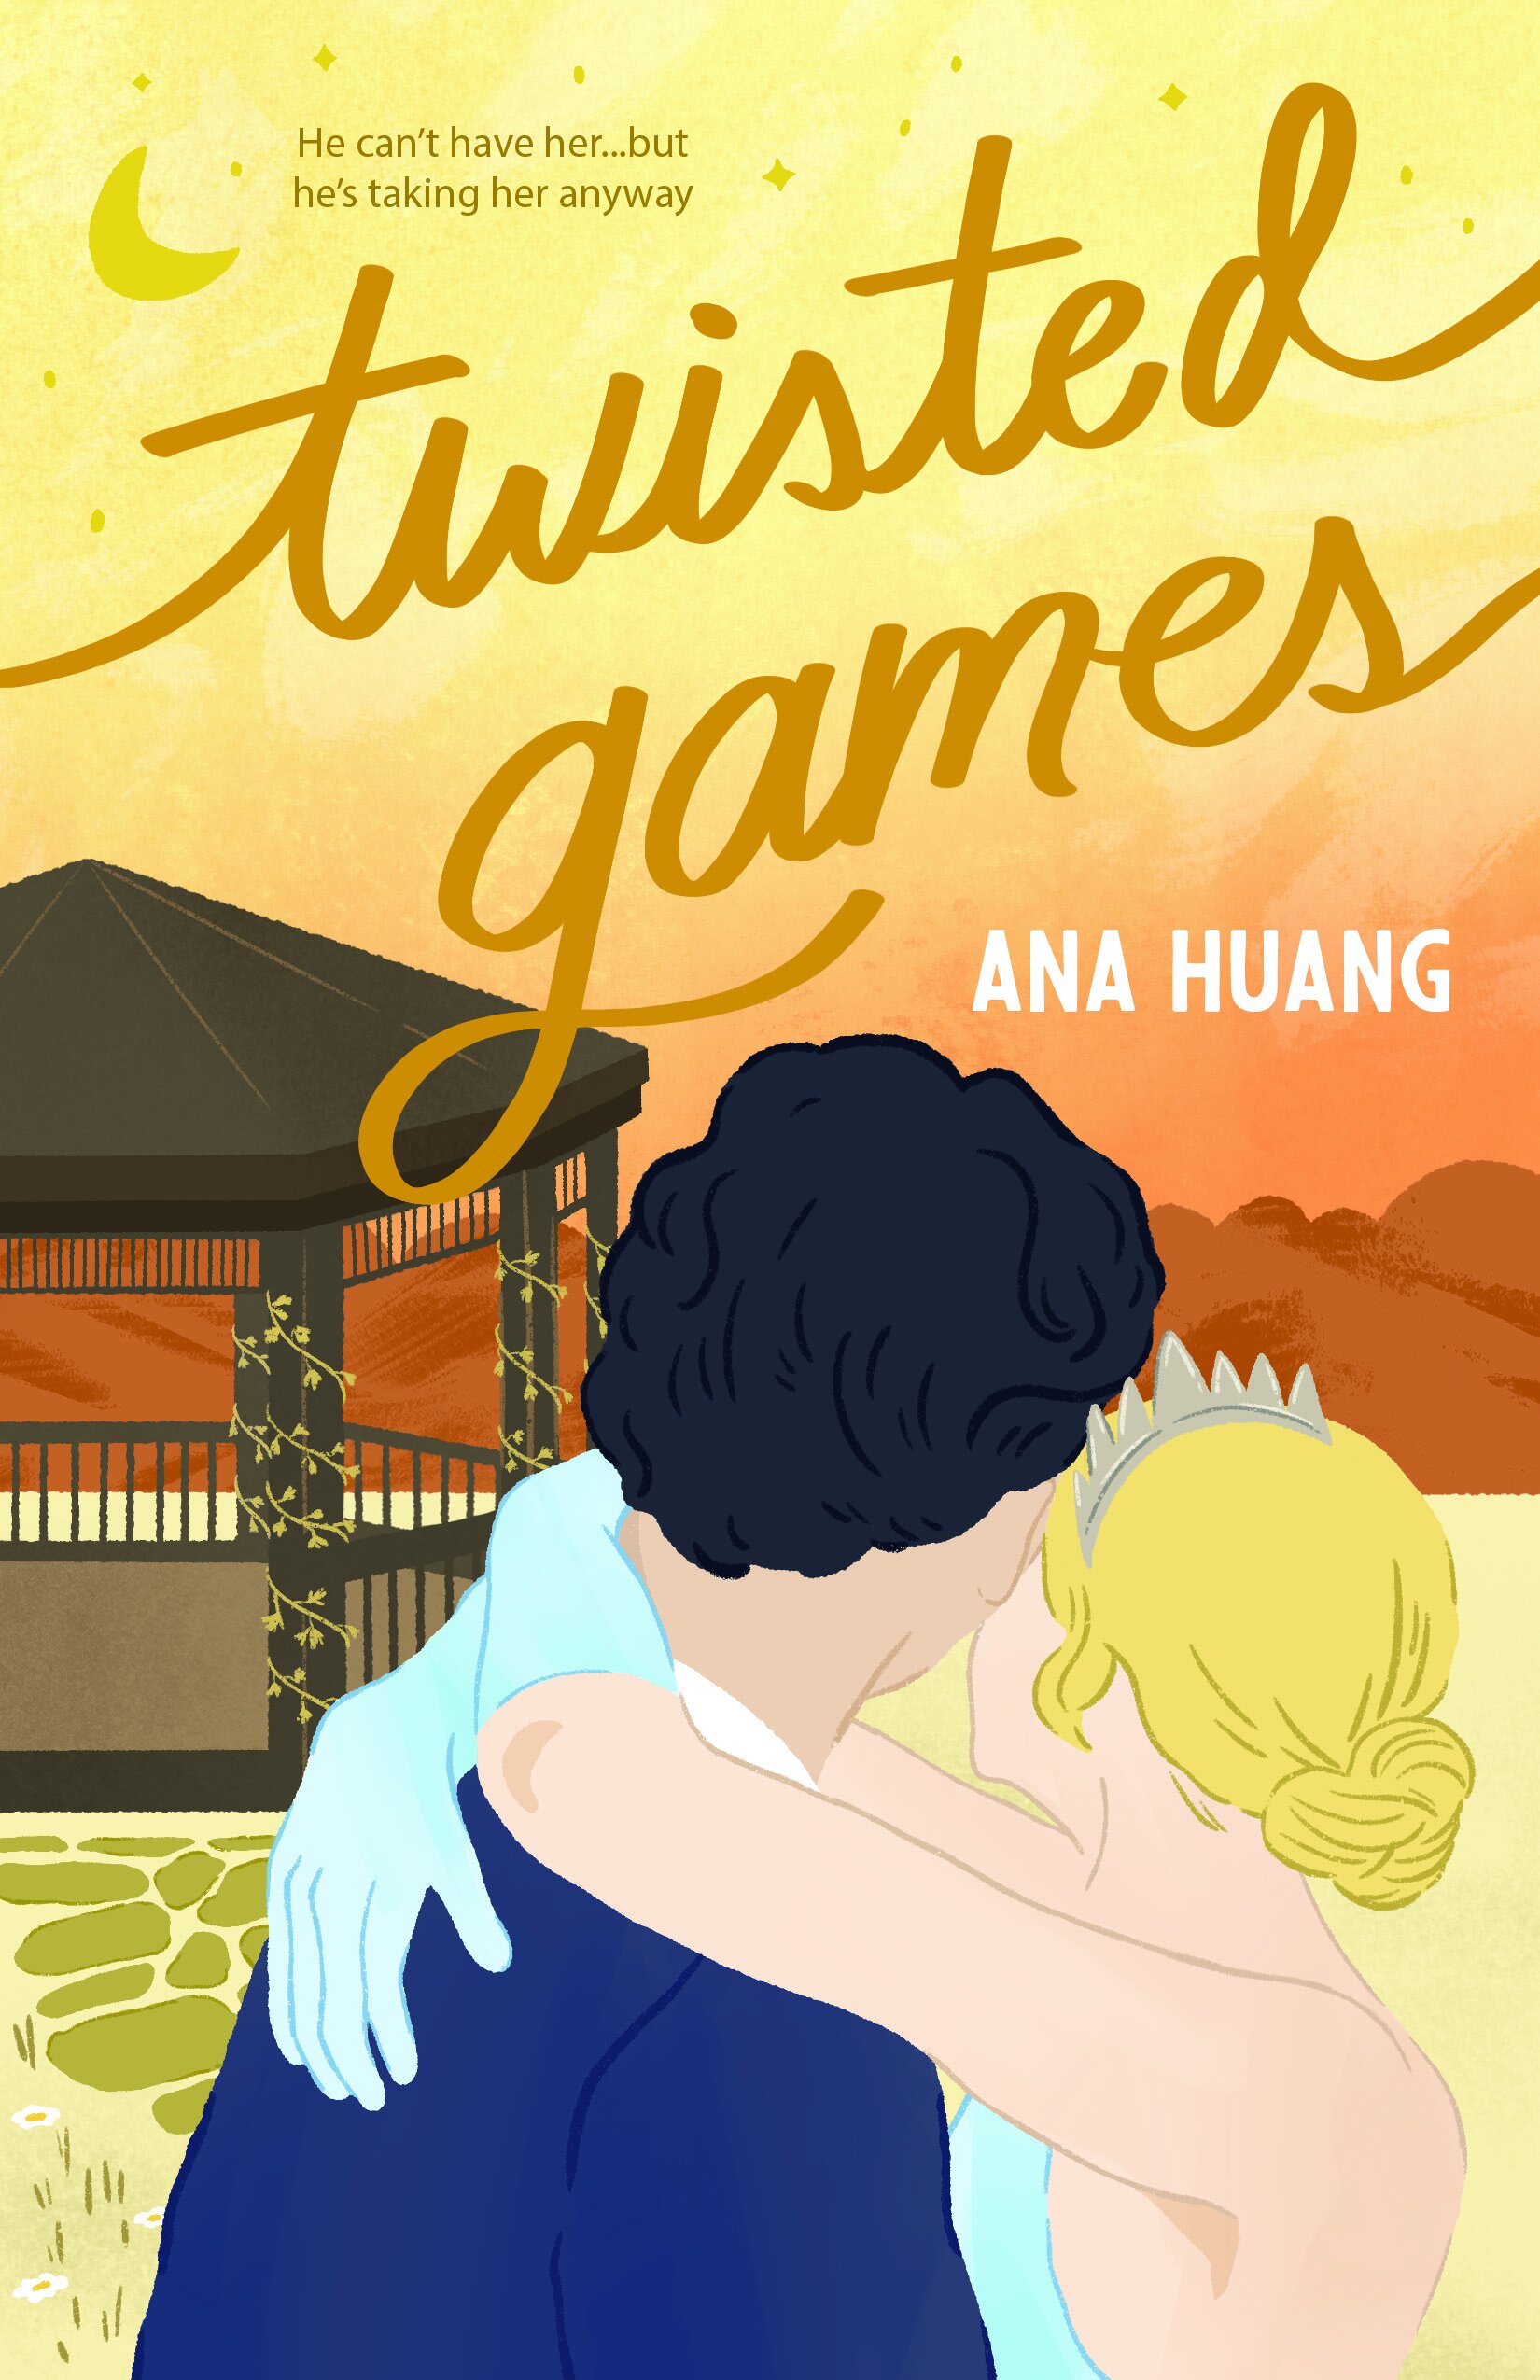 Twisted love + Twisted Games - Ana Huang - Twisted Series